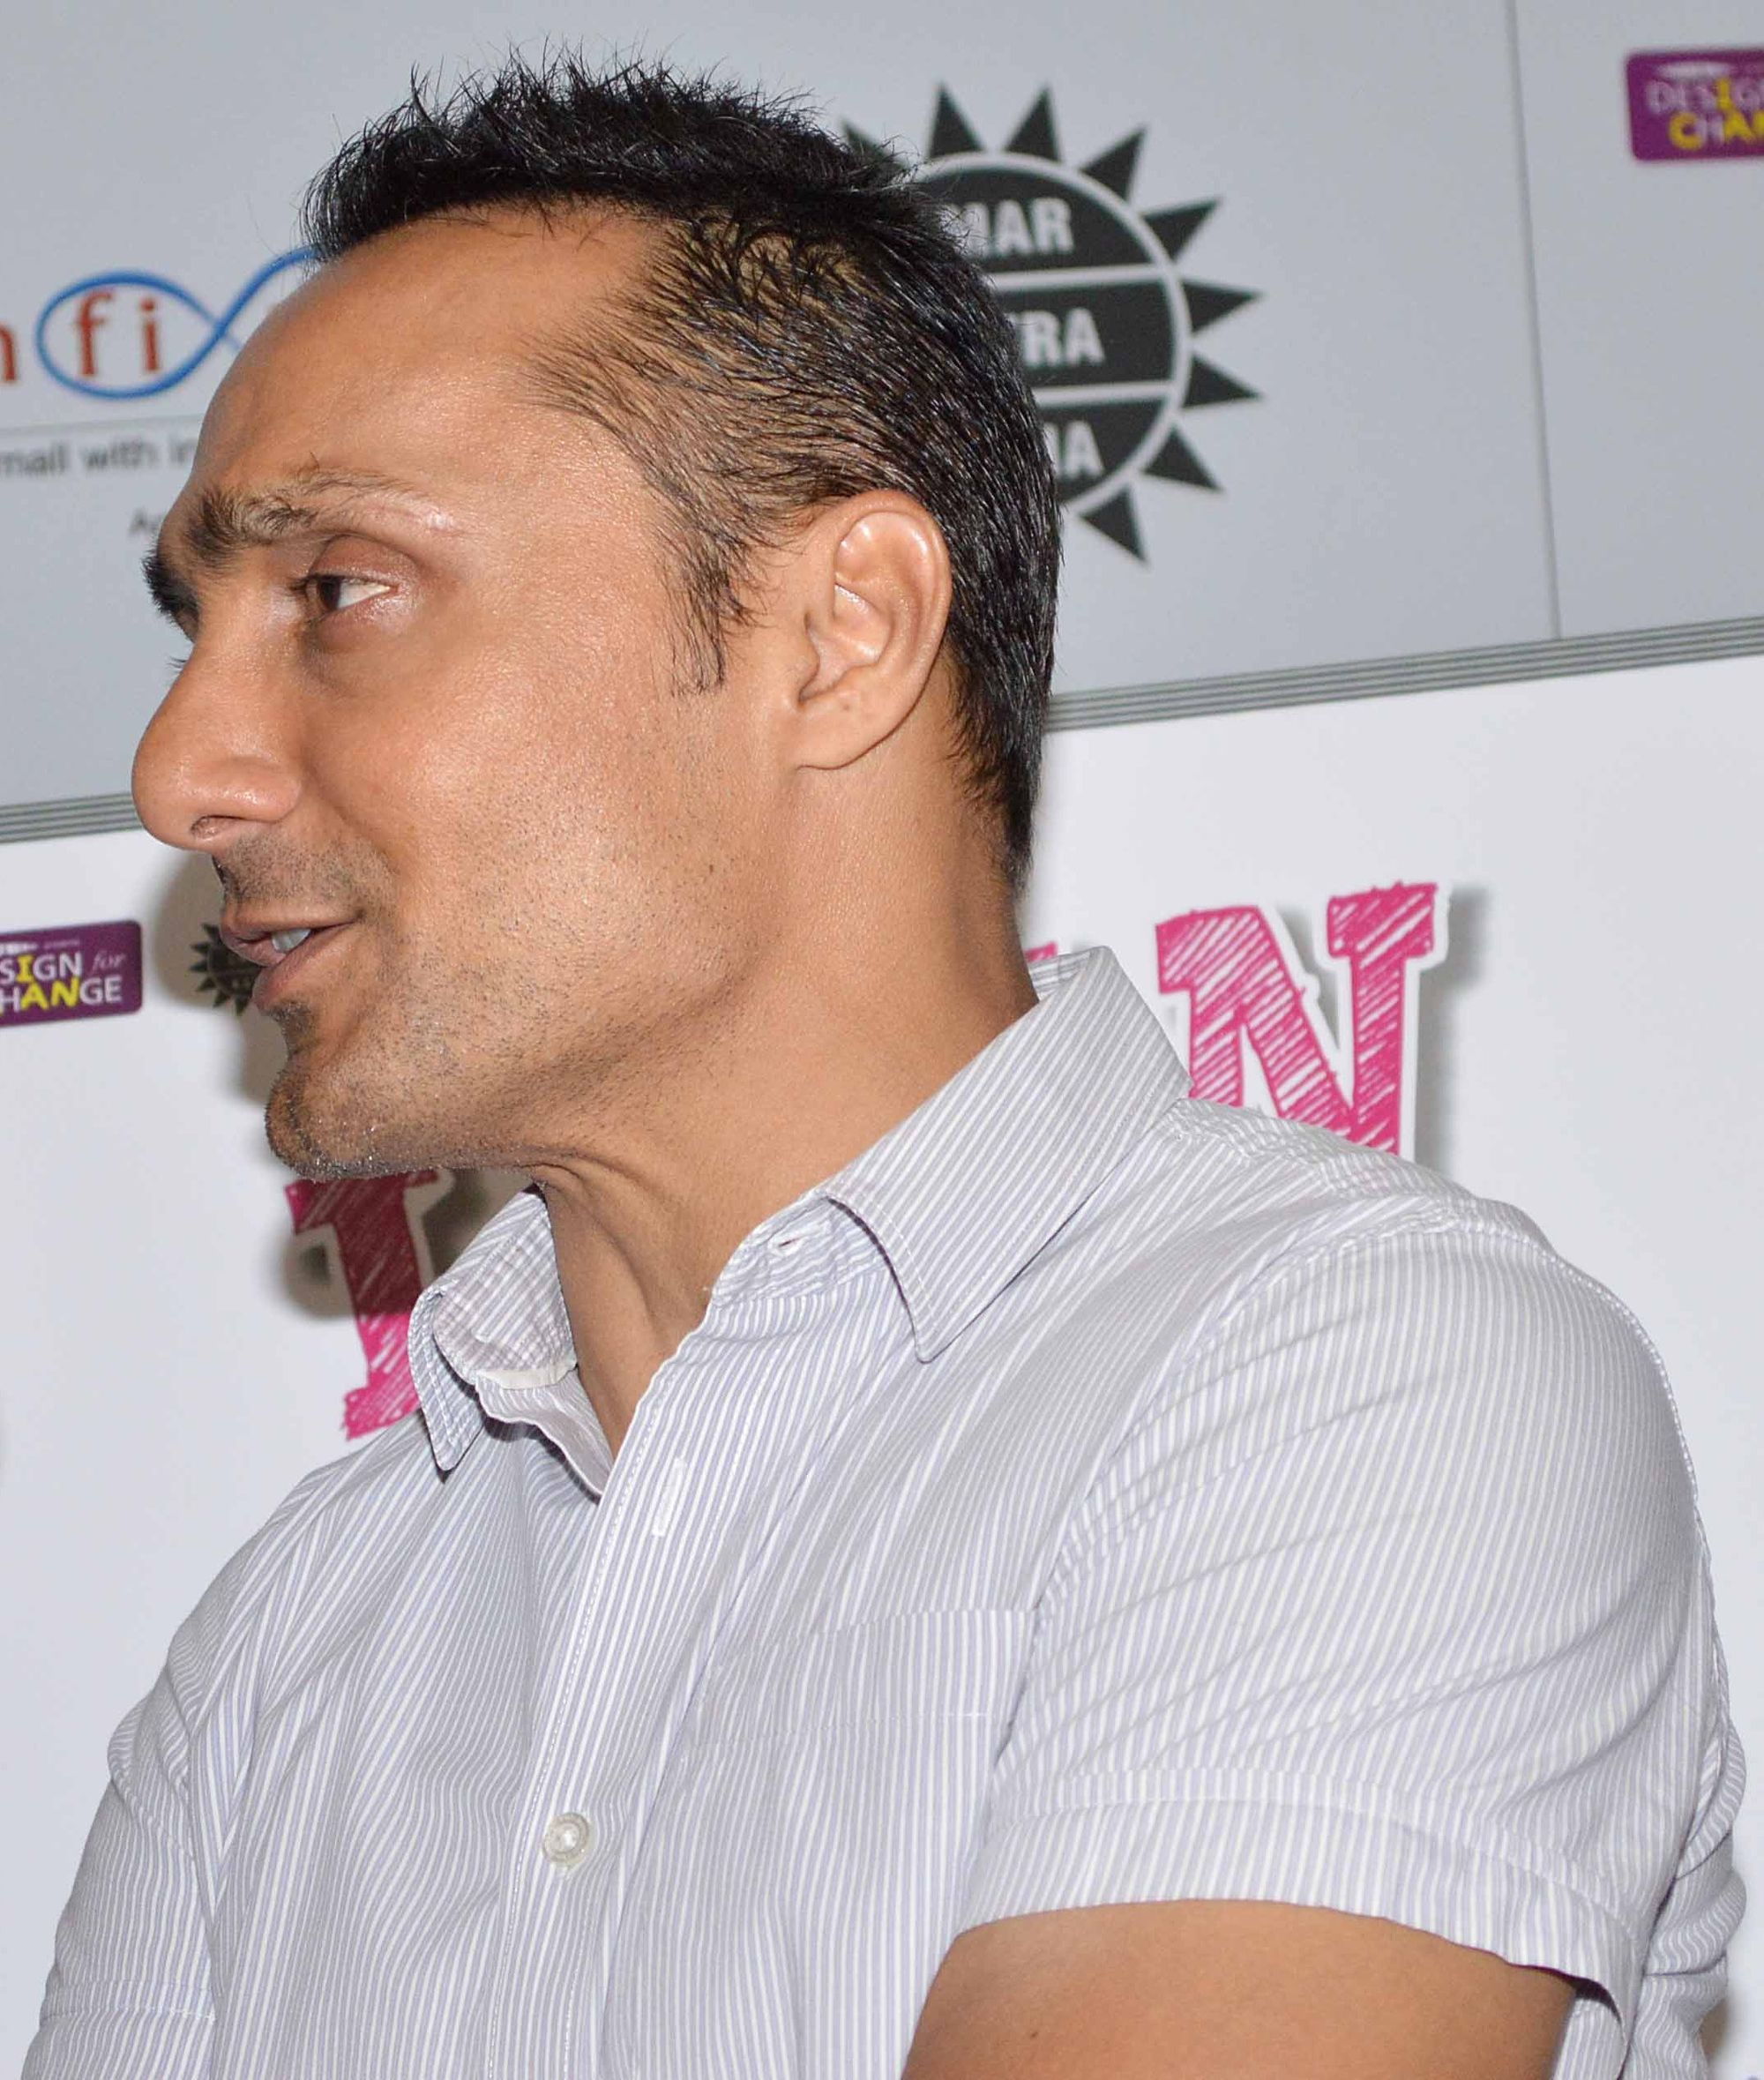 Rahul Bose at the 'I Can' book launch